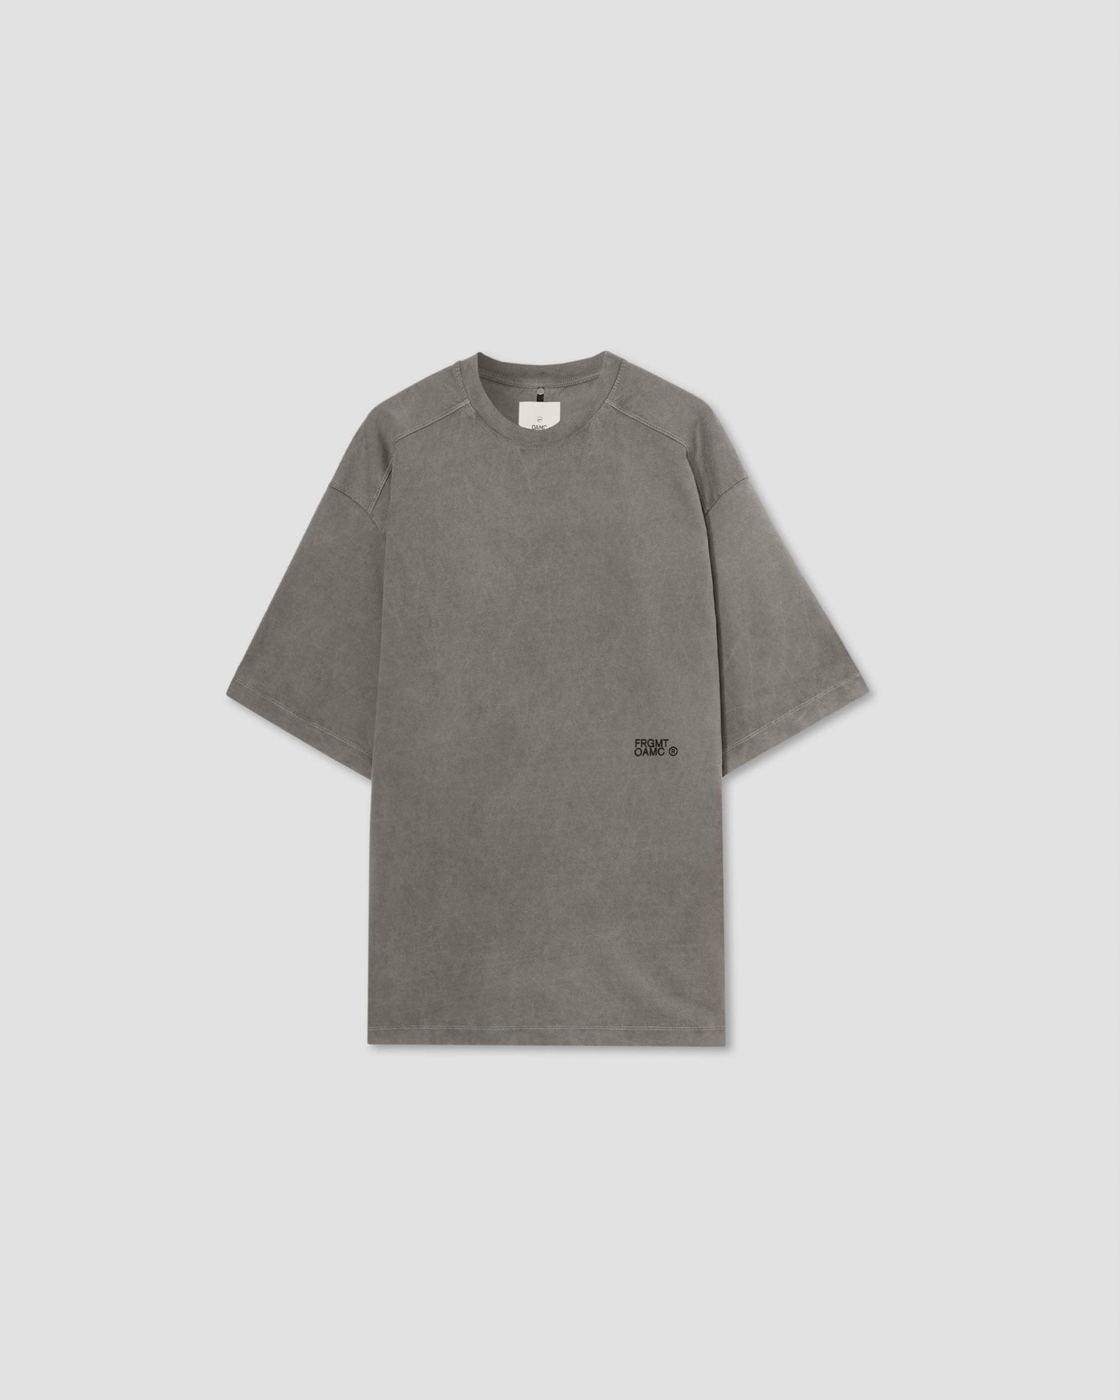 fragment design & OAMC Drop Plant-Dyed Jackets, Hoodies, Shirts